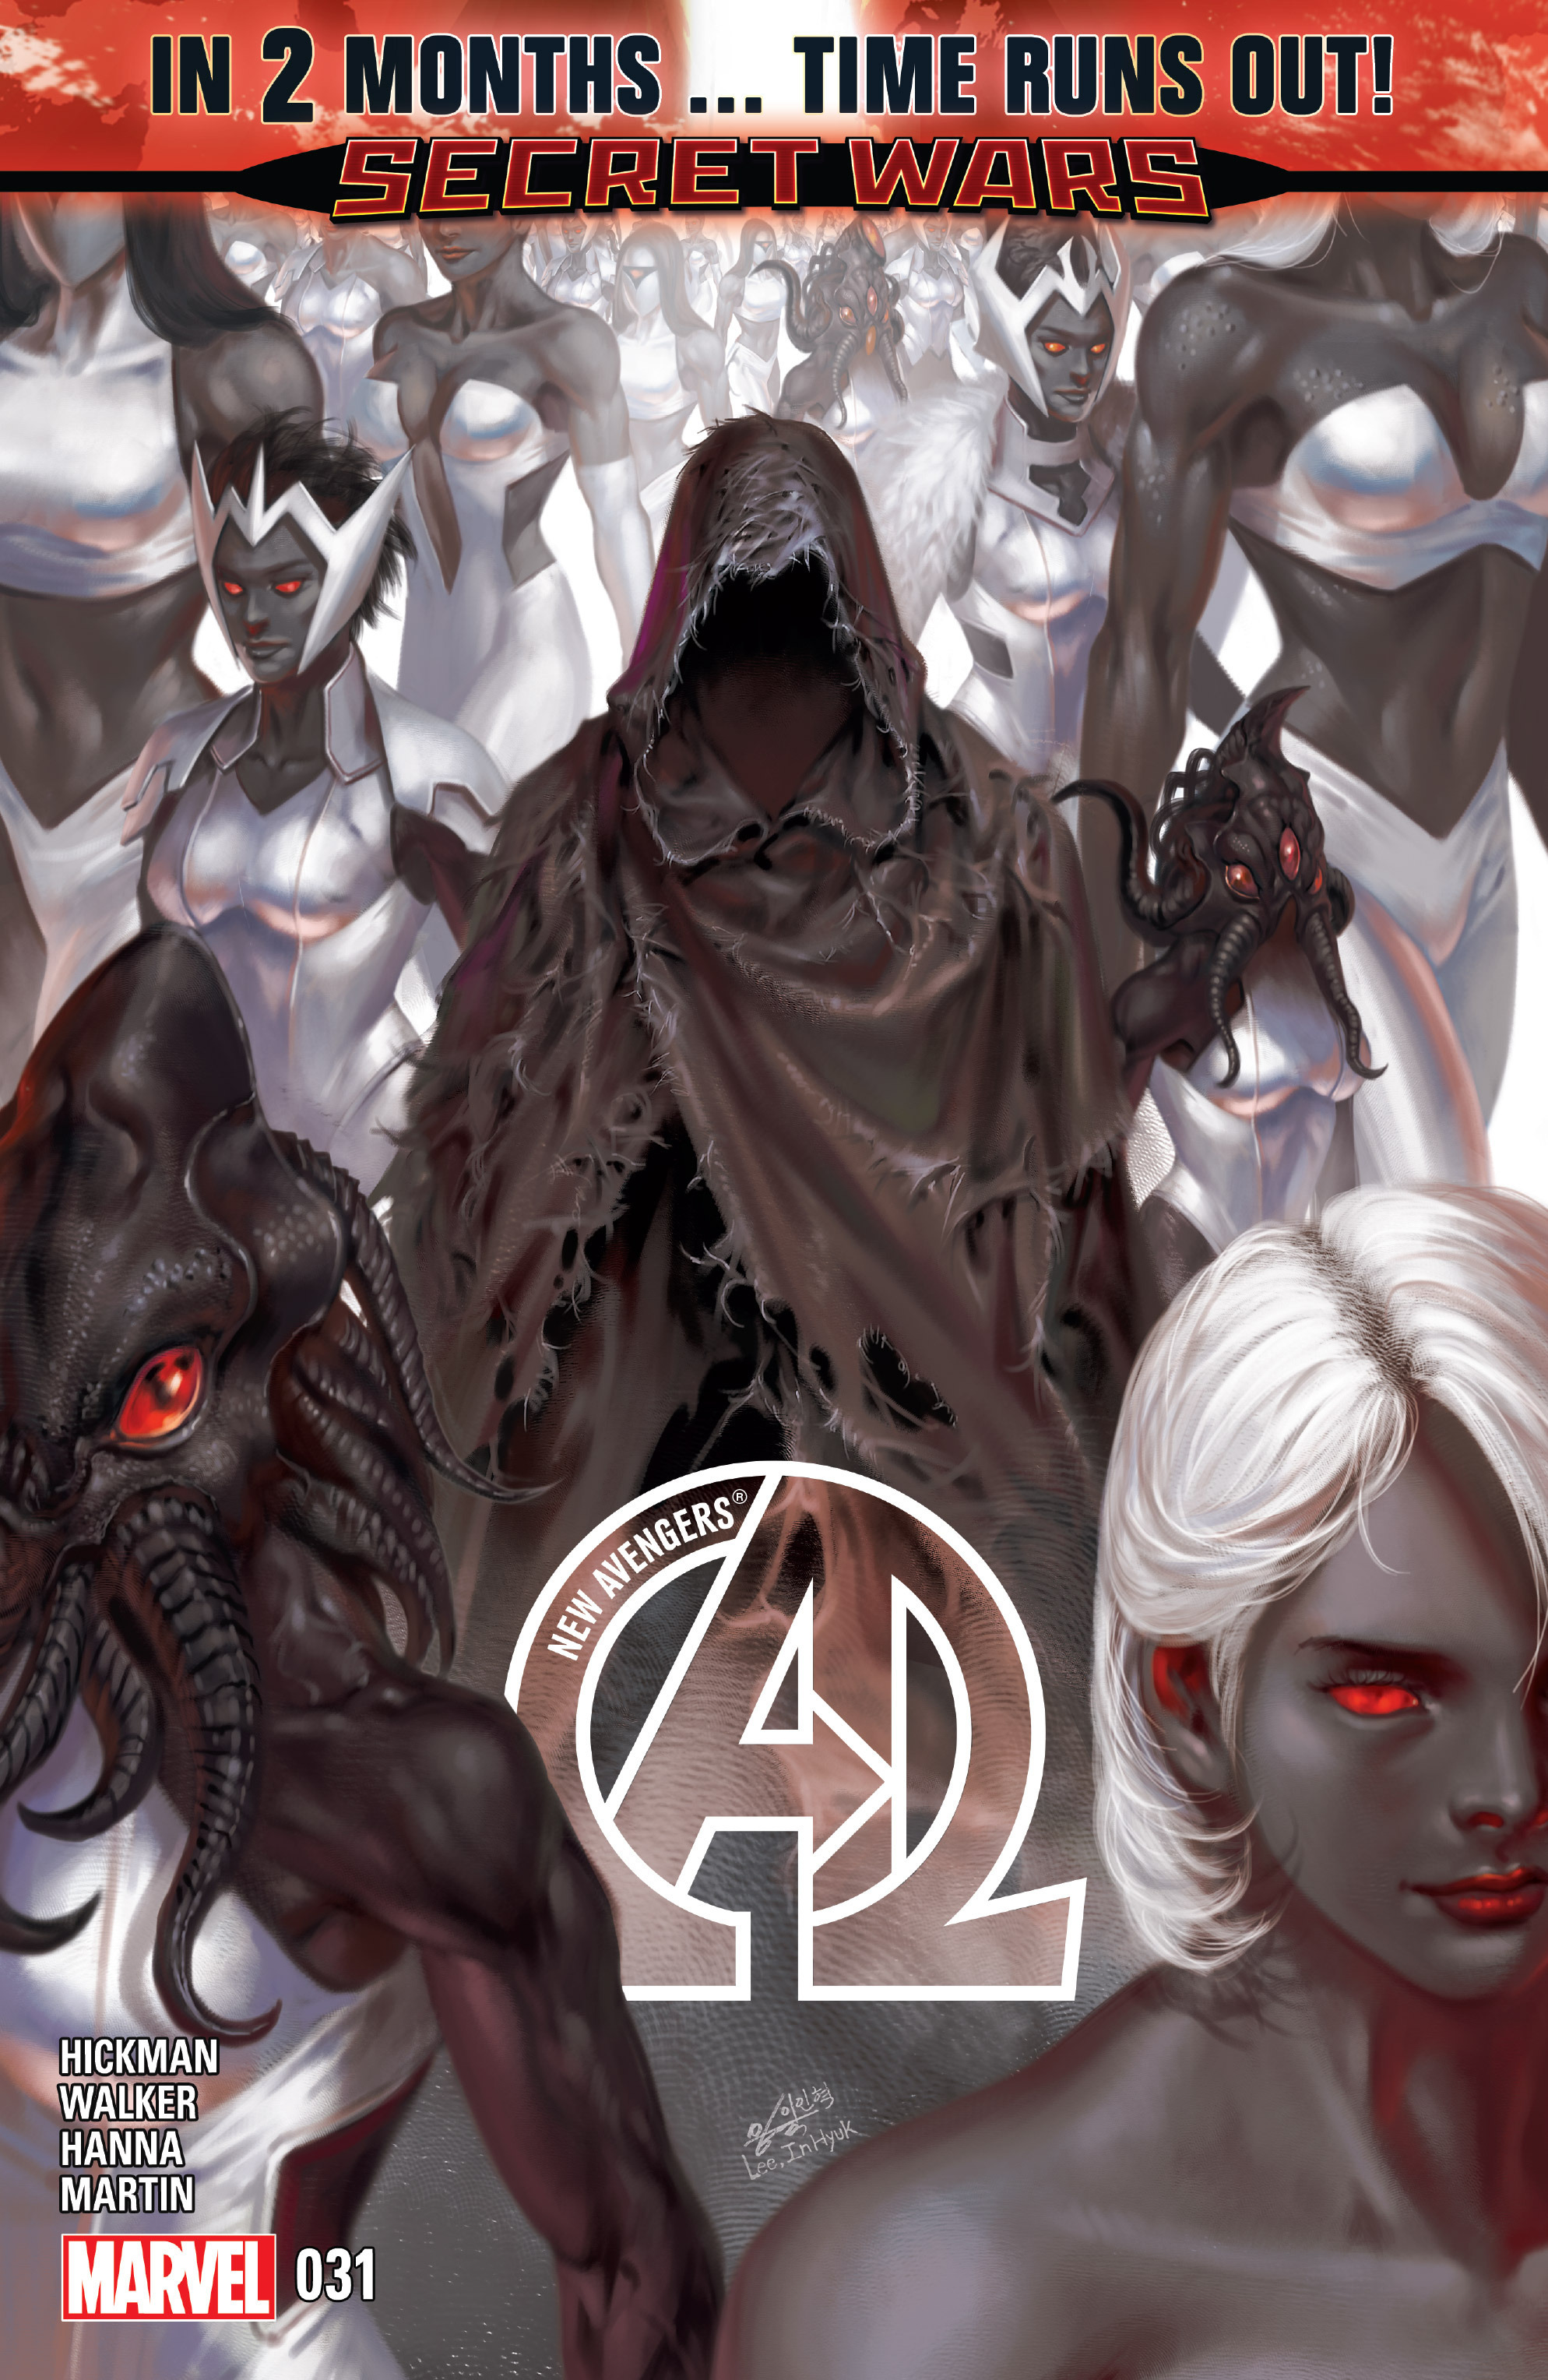 Read online Avengers: Time Runs Out comic -  Issue # TPB 4 - 3